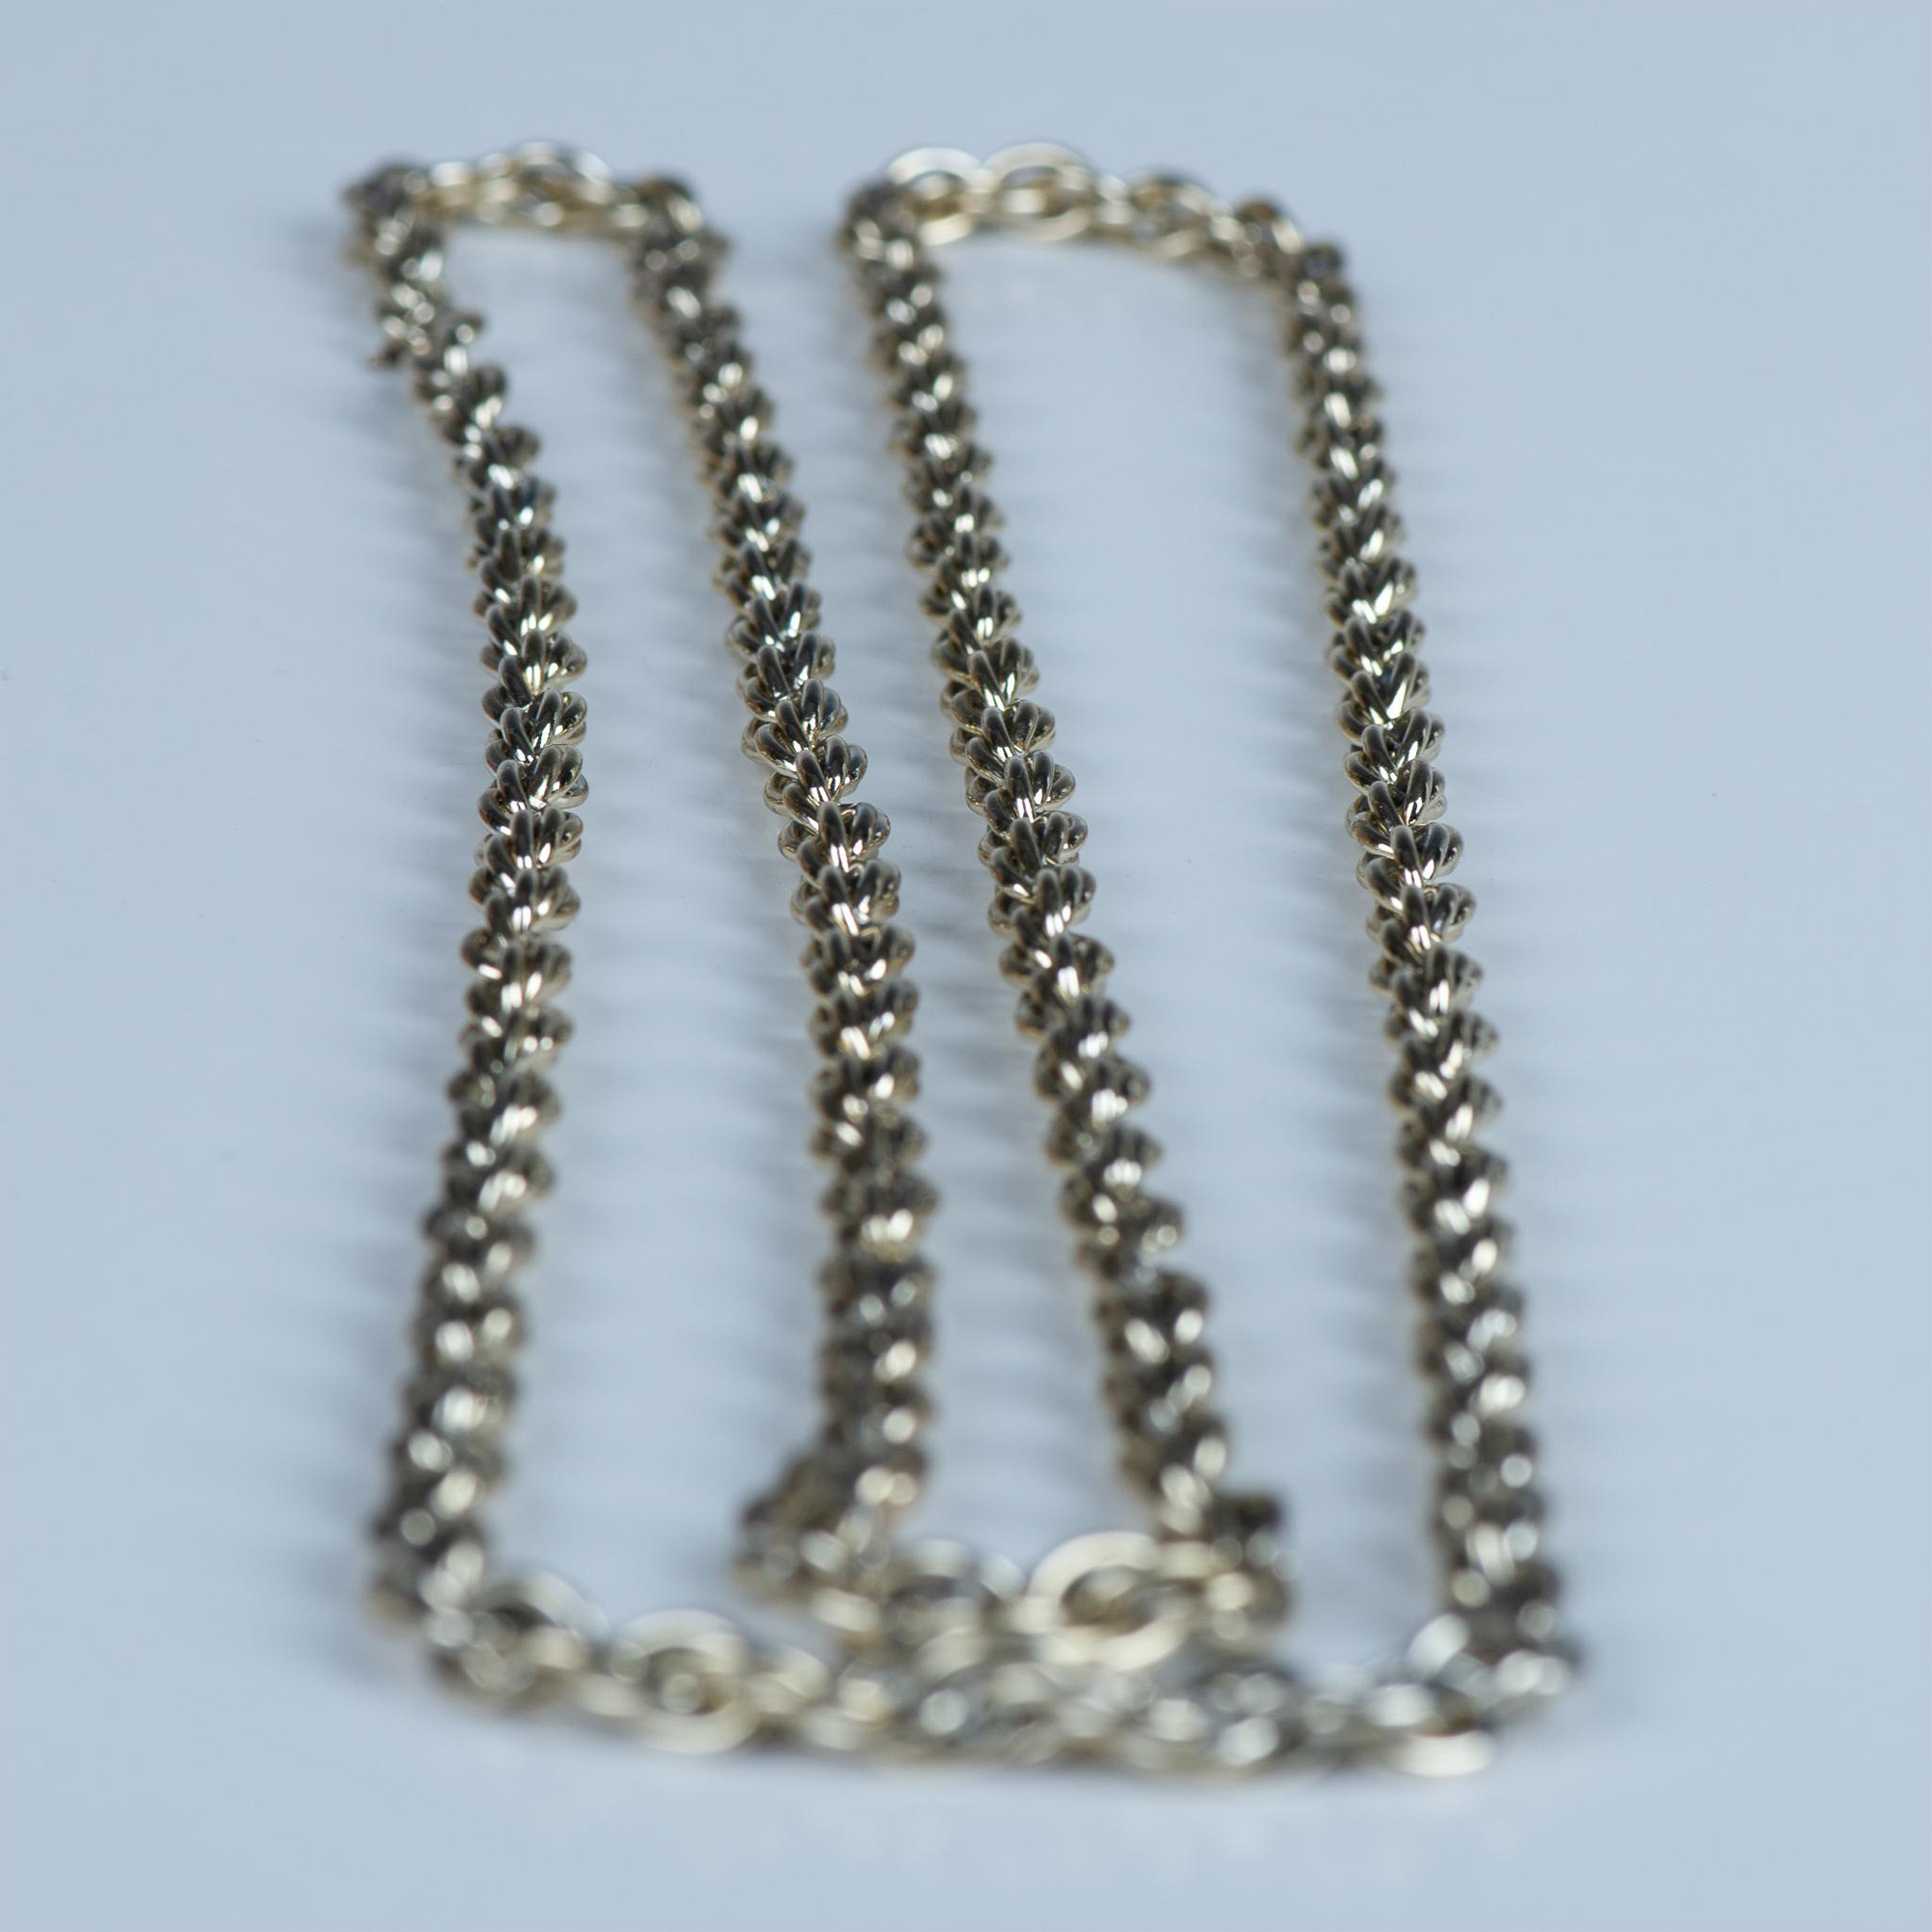 Long Twisted Gold Metal Chain - Image 2 of 6